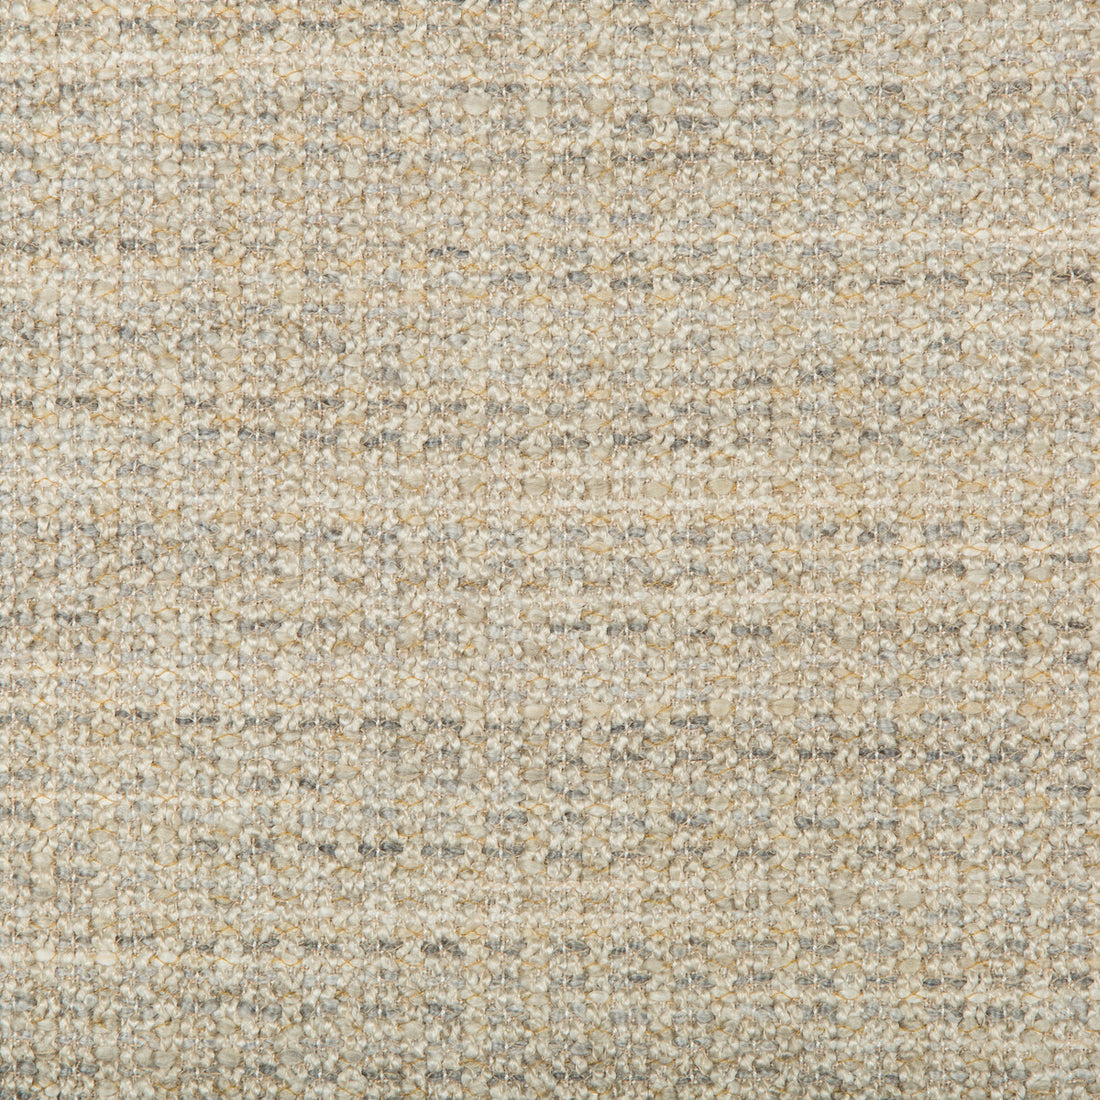 Sandibe Boucle fabric in coconut color - pattern 35511.116.0 - by Kravet Design in the Barclay Butera Sagamore collection